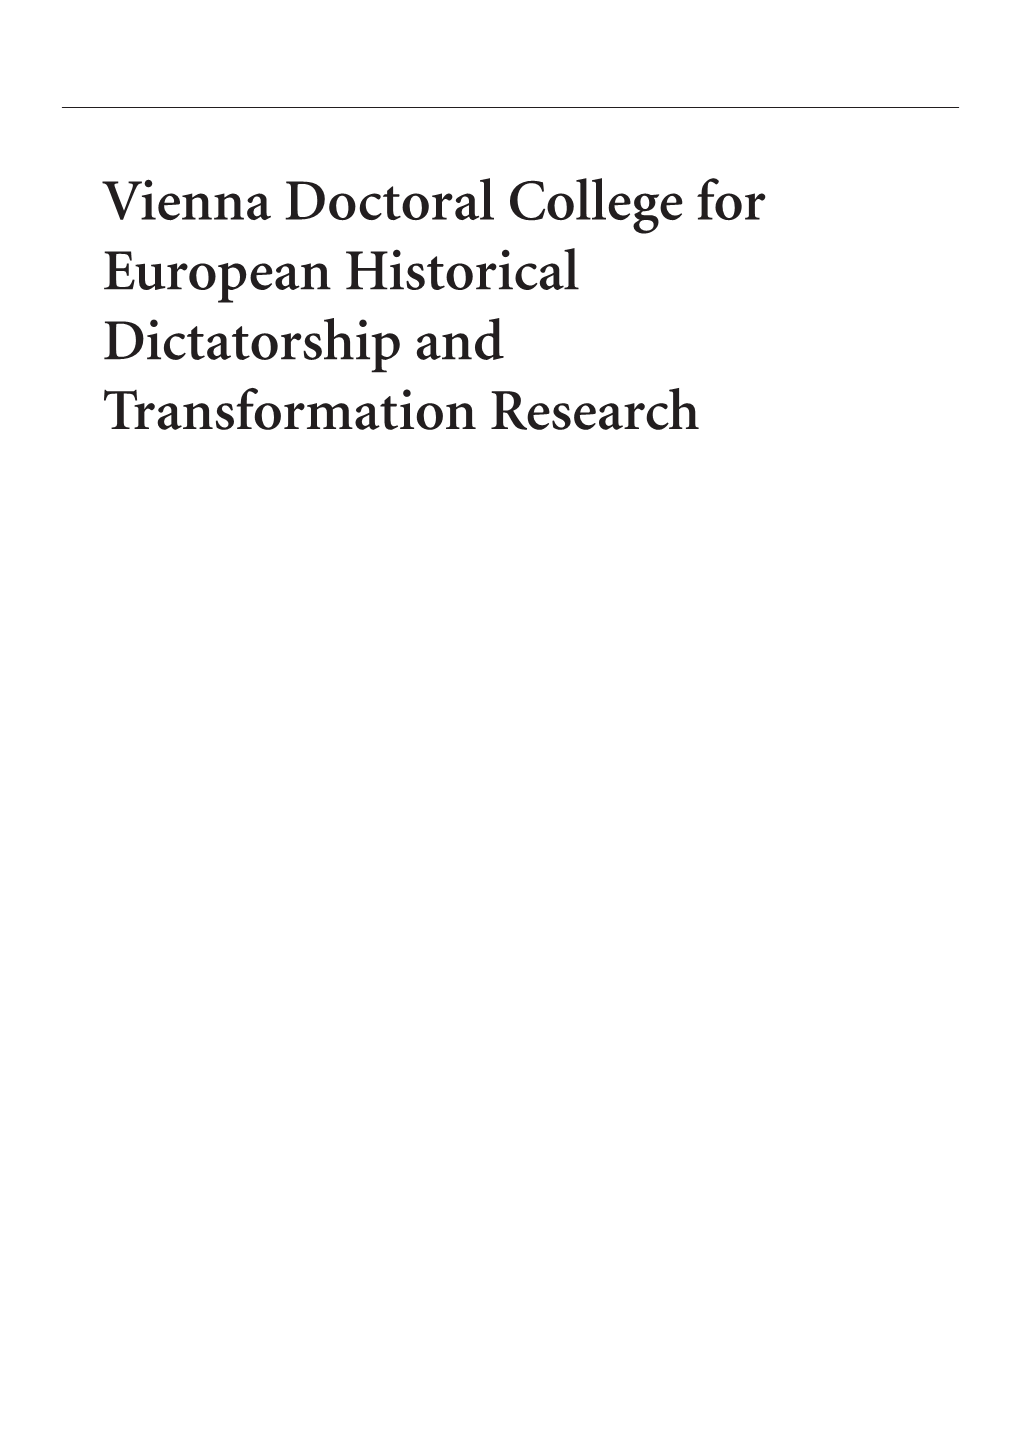 Vienna Doctoral College for European Historical Dictatorship and Transformation Research Content